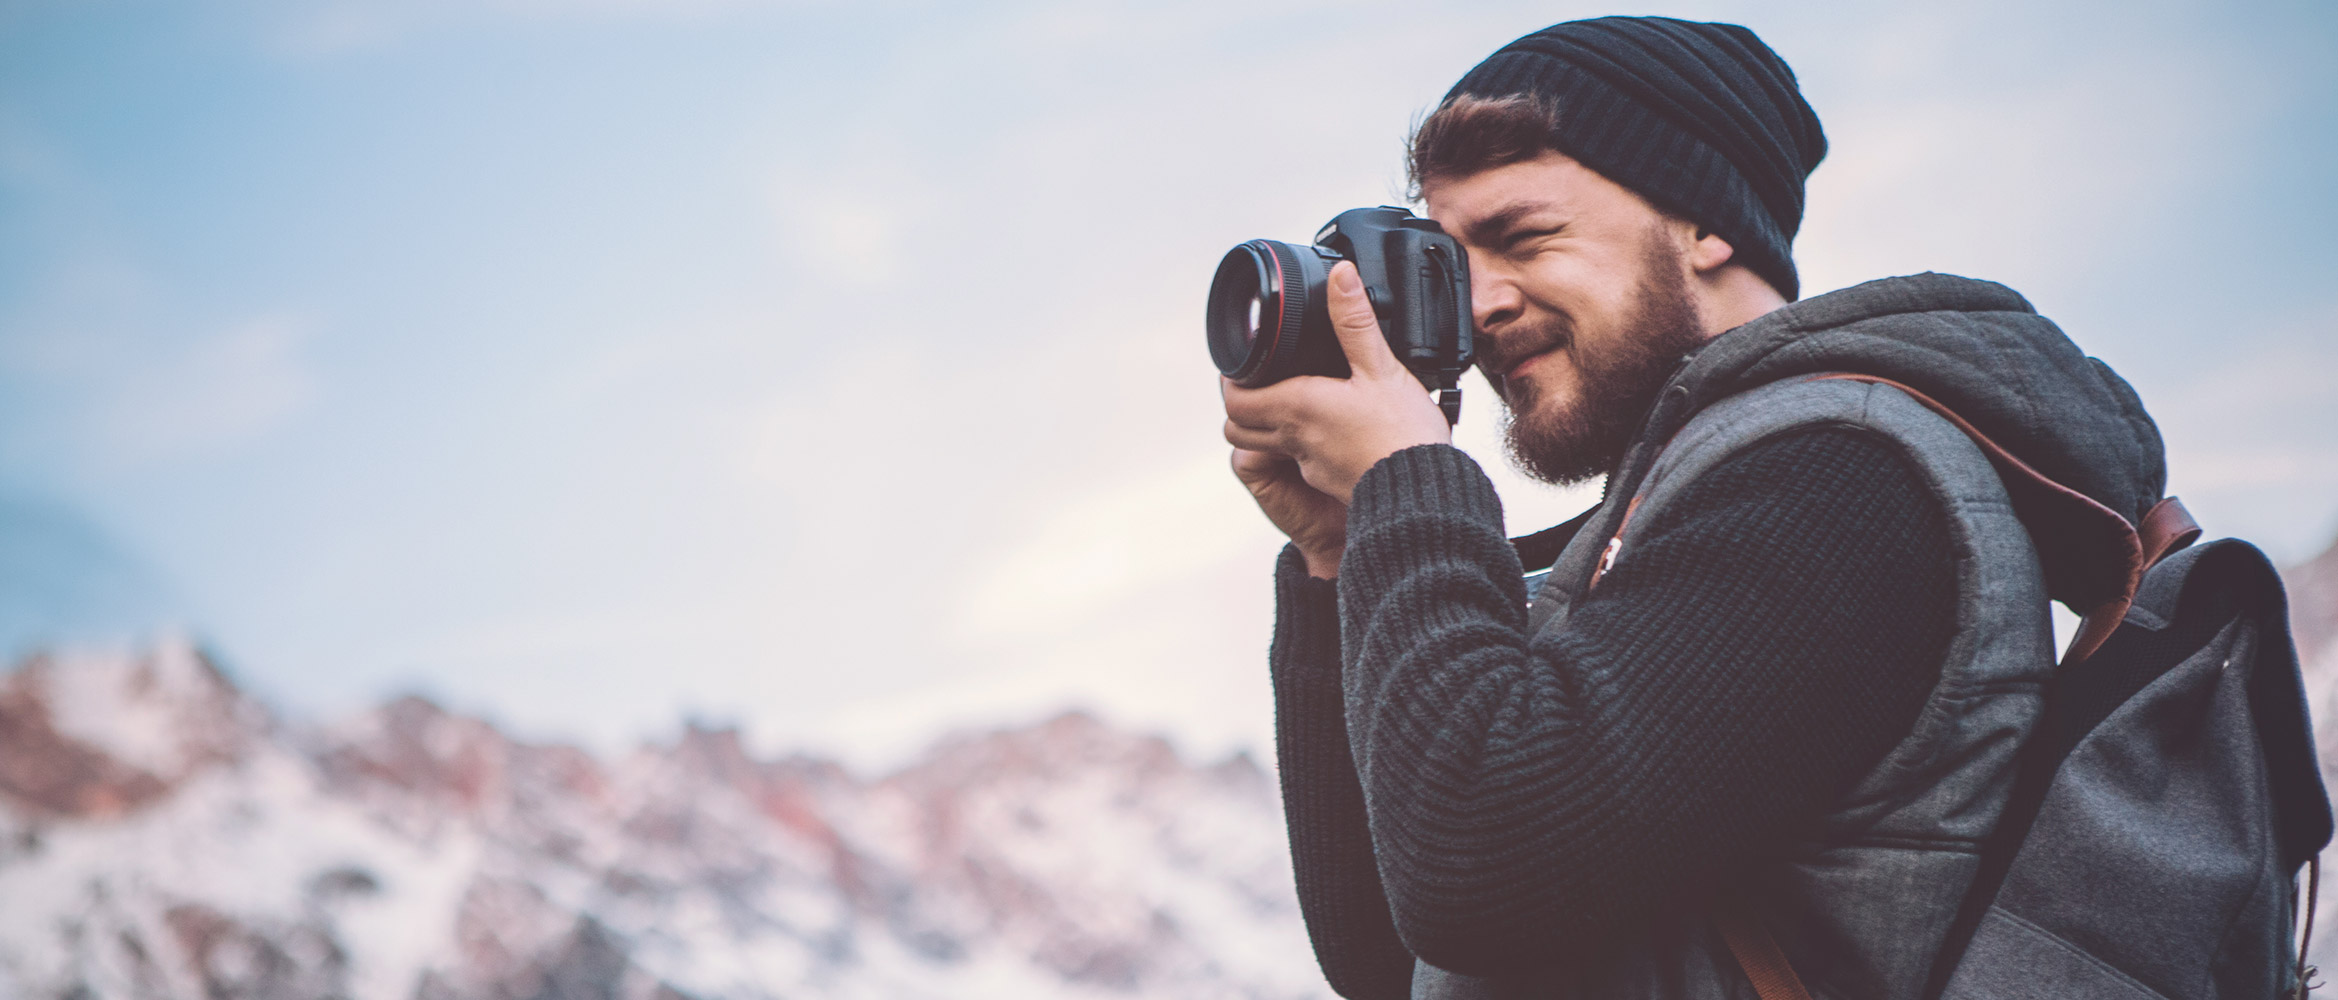 Must-have camera equipment every photographer needs - TripSmarts ...